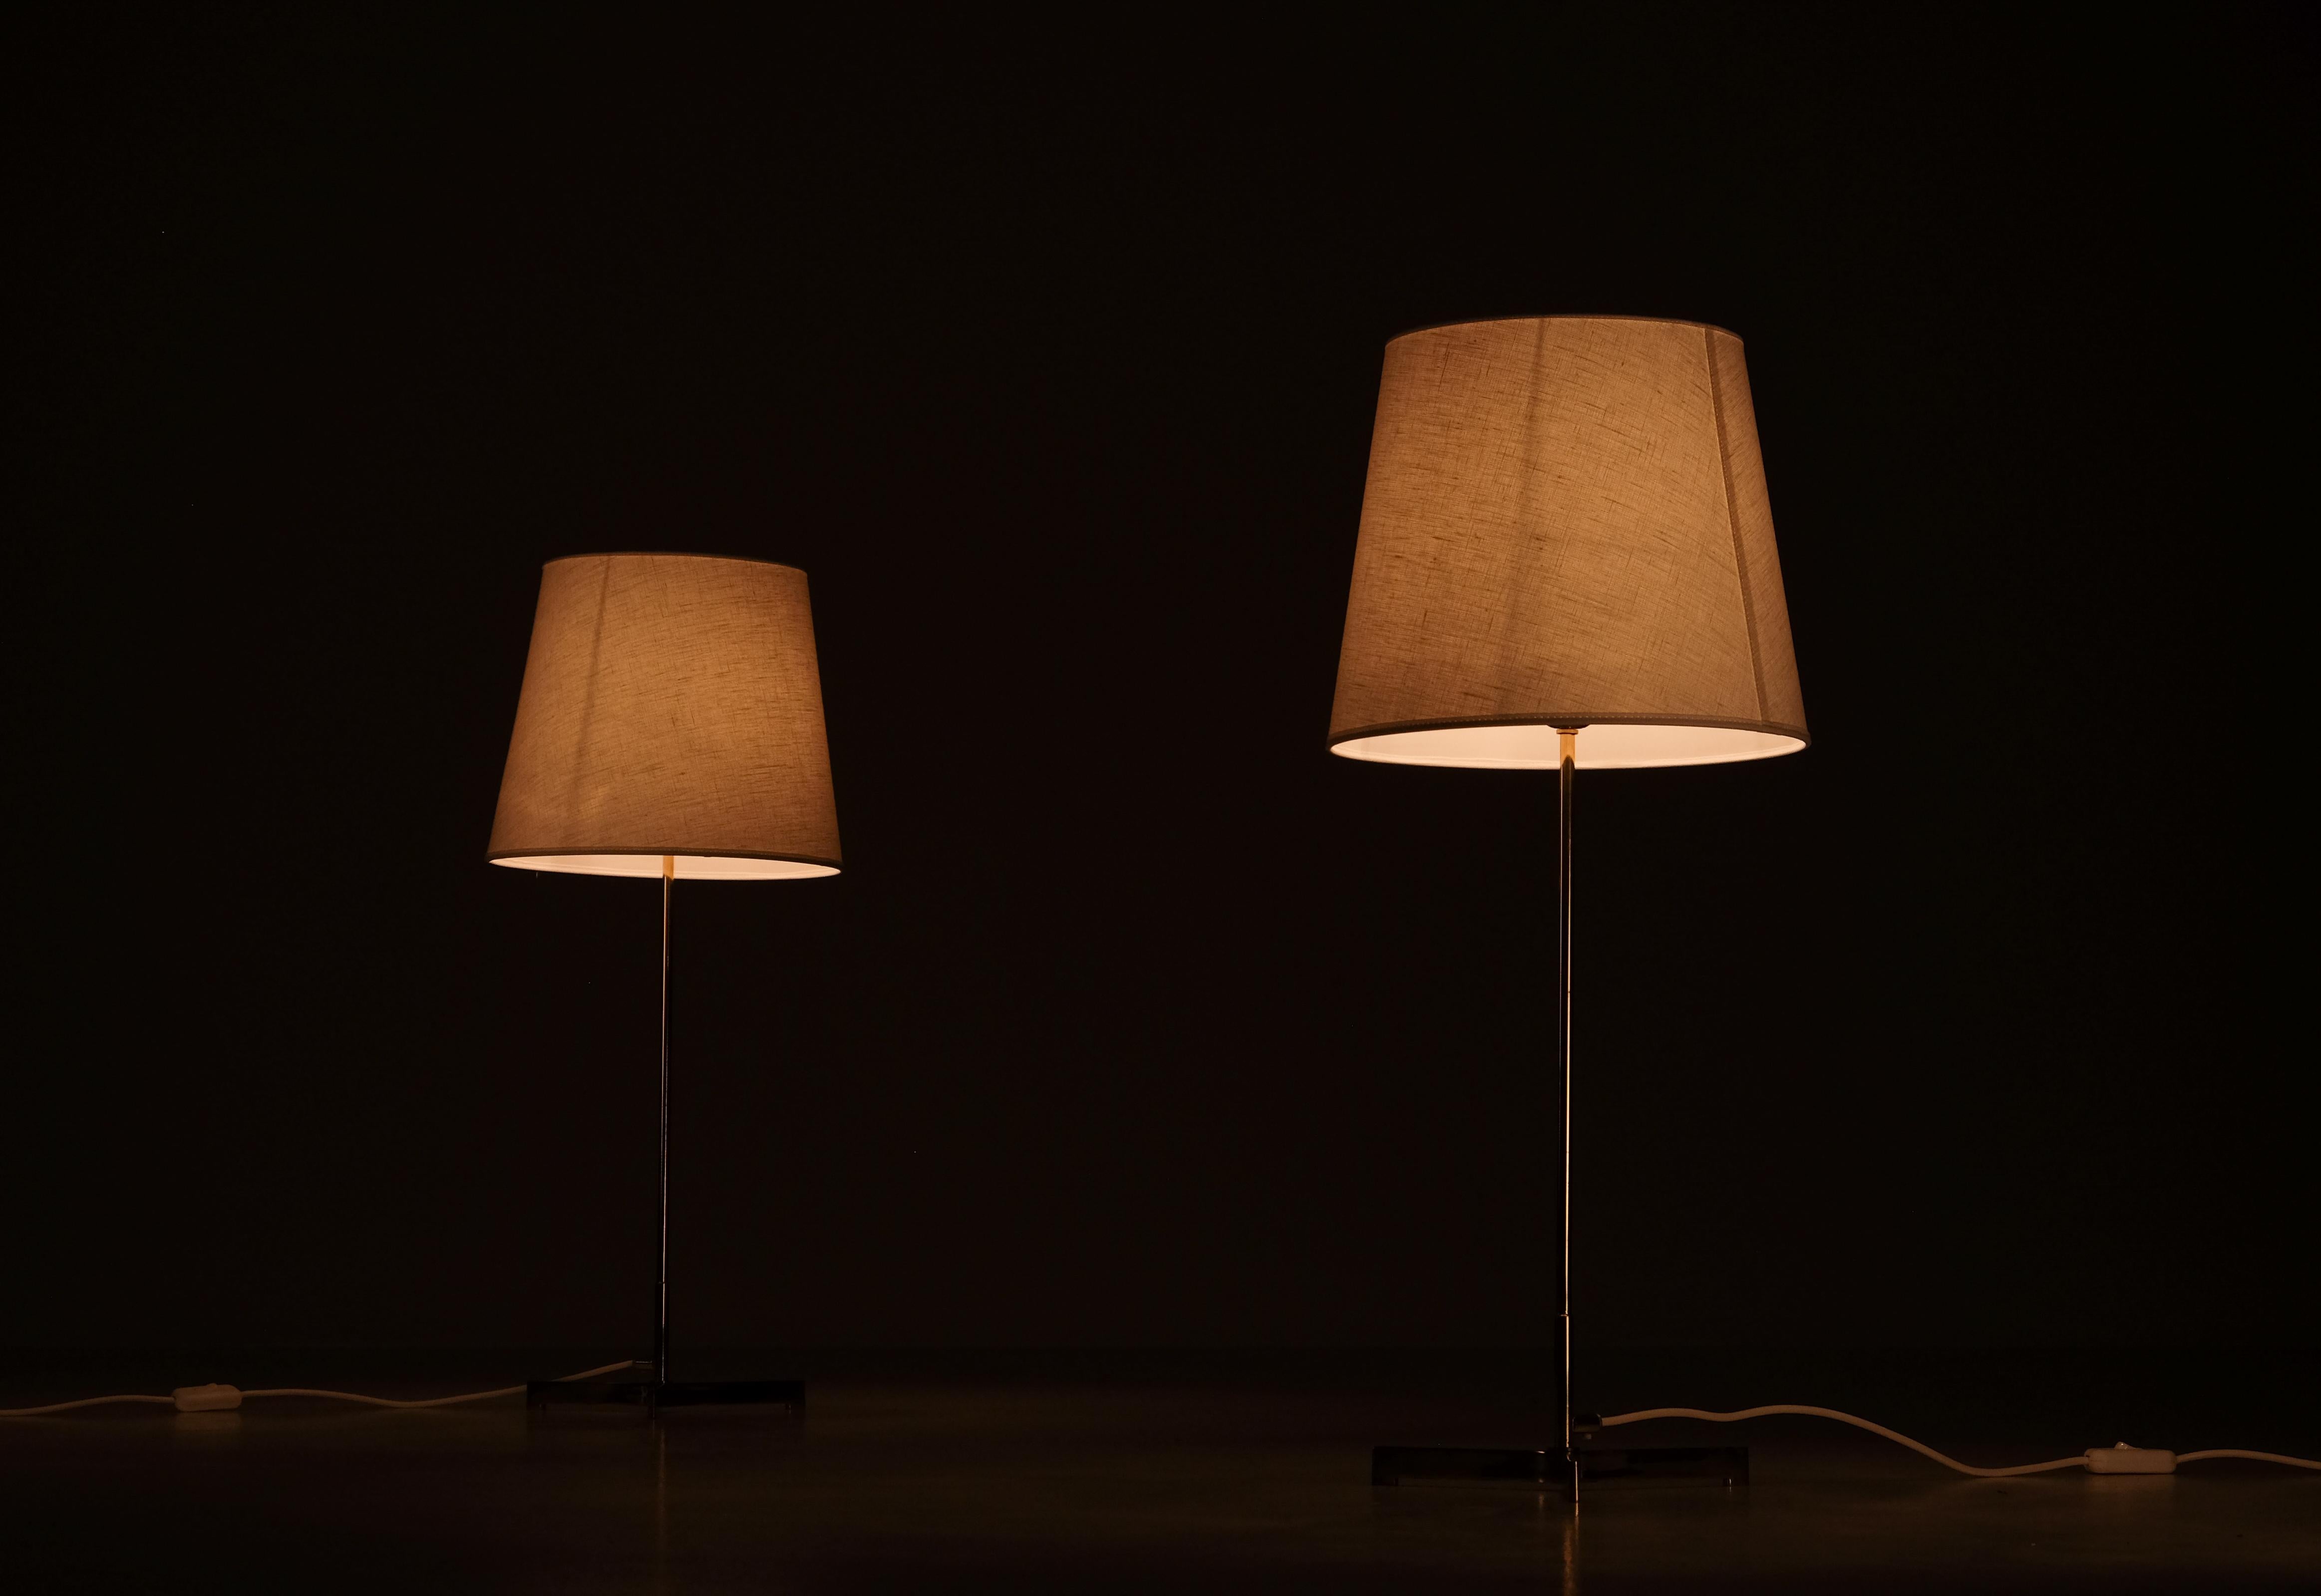 Pair of Hans-Agne Jakobsson Brass Table Lamps, 1960s In Good Condition For Sale In Stockholm, SE